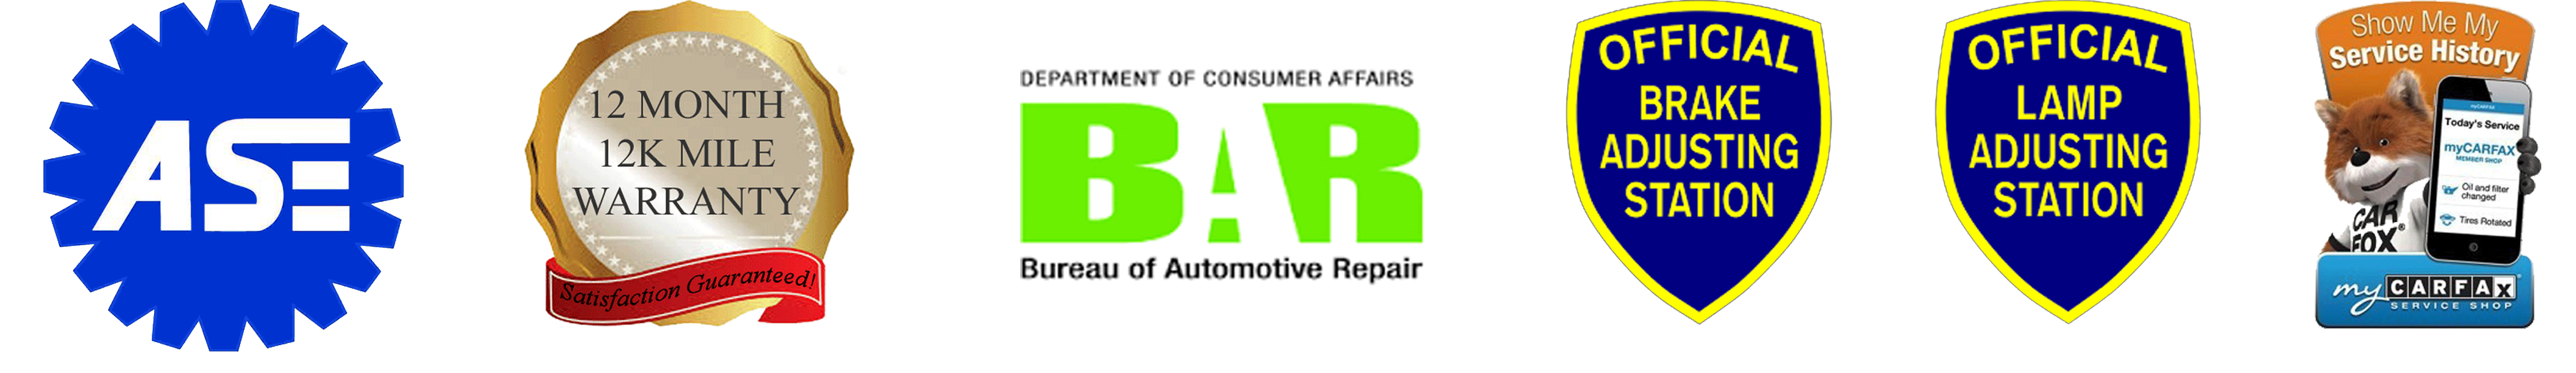 auto service coupon, discount auto service, dmv brake and lamp certification, brake and light certificet, ase certified santa rosa, affordable auto repair santa rosa, auto repair in santa rosa, 